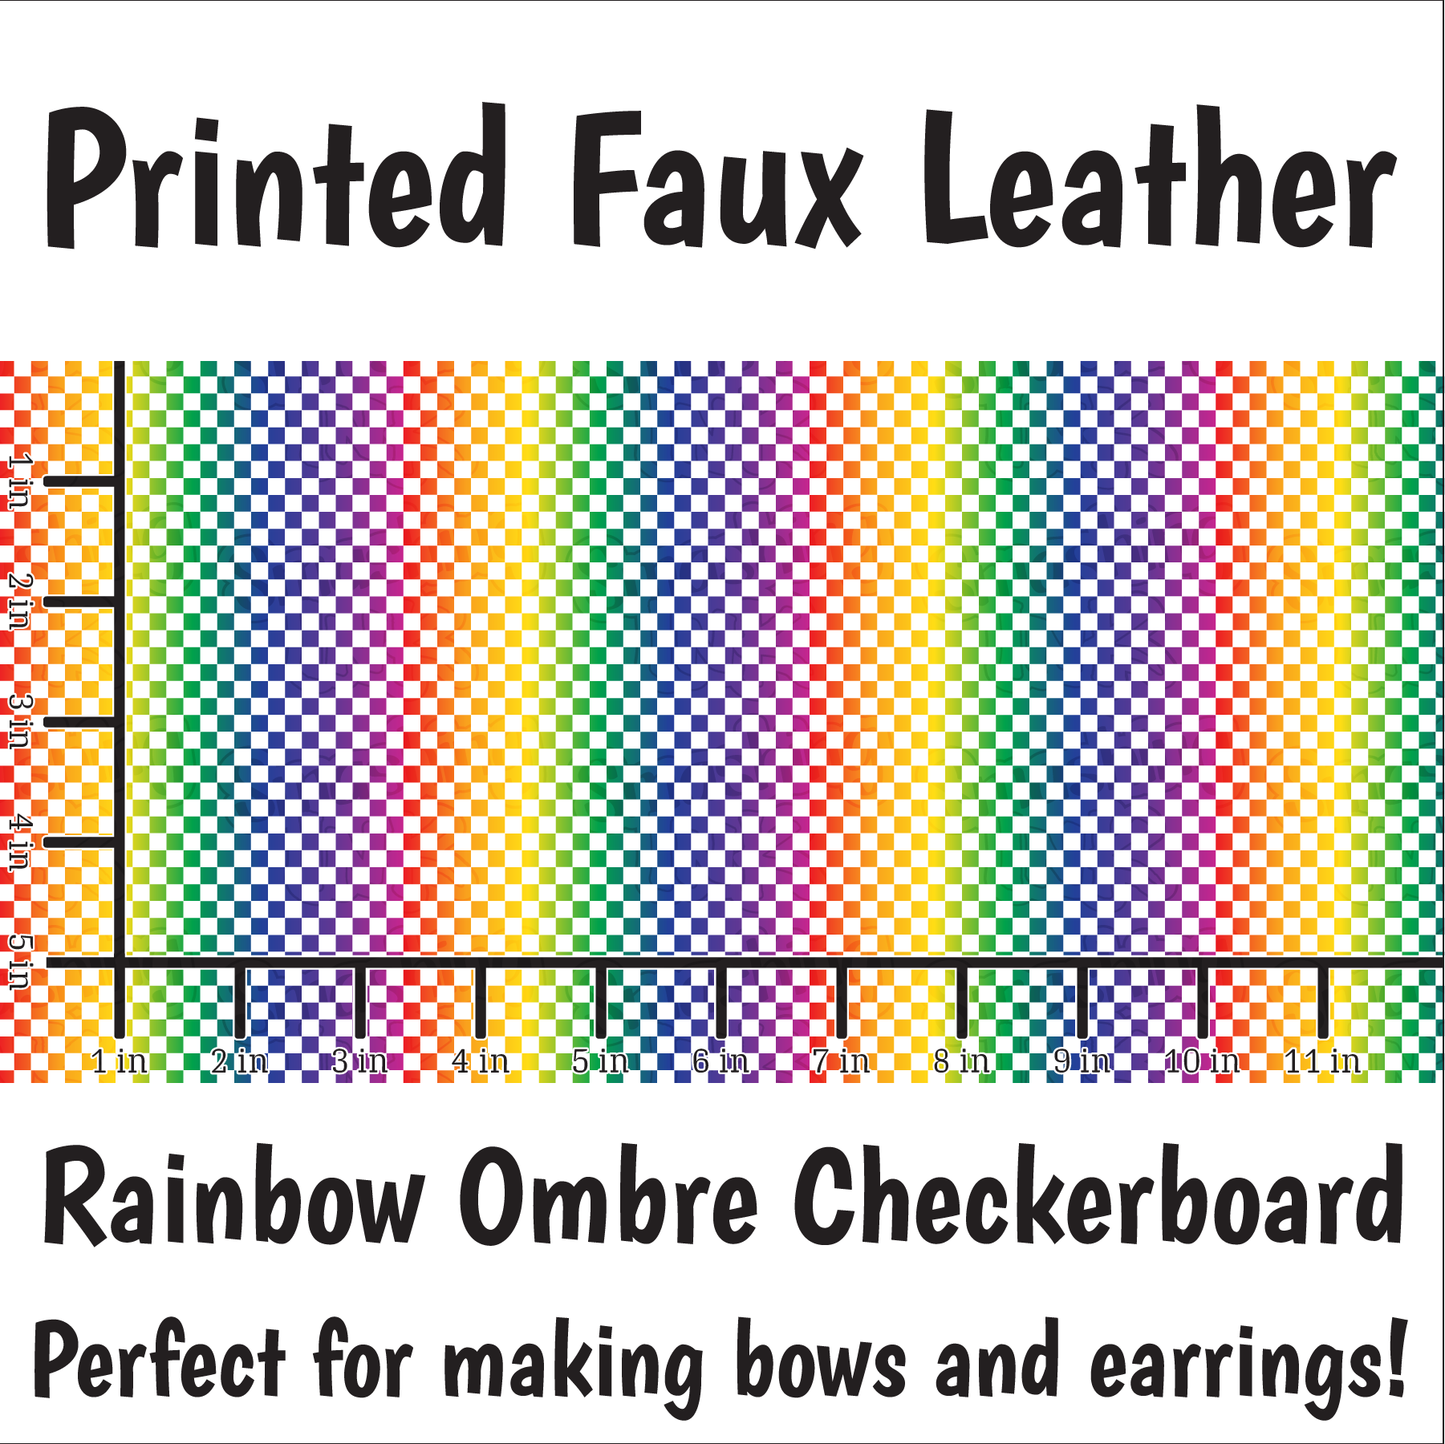 Rainbow Ombre Checkerboard - Faux Leather Sheet (SHIPS IN 3 BUS DAYS)